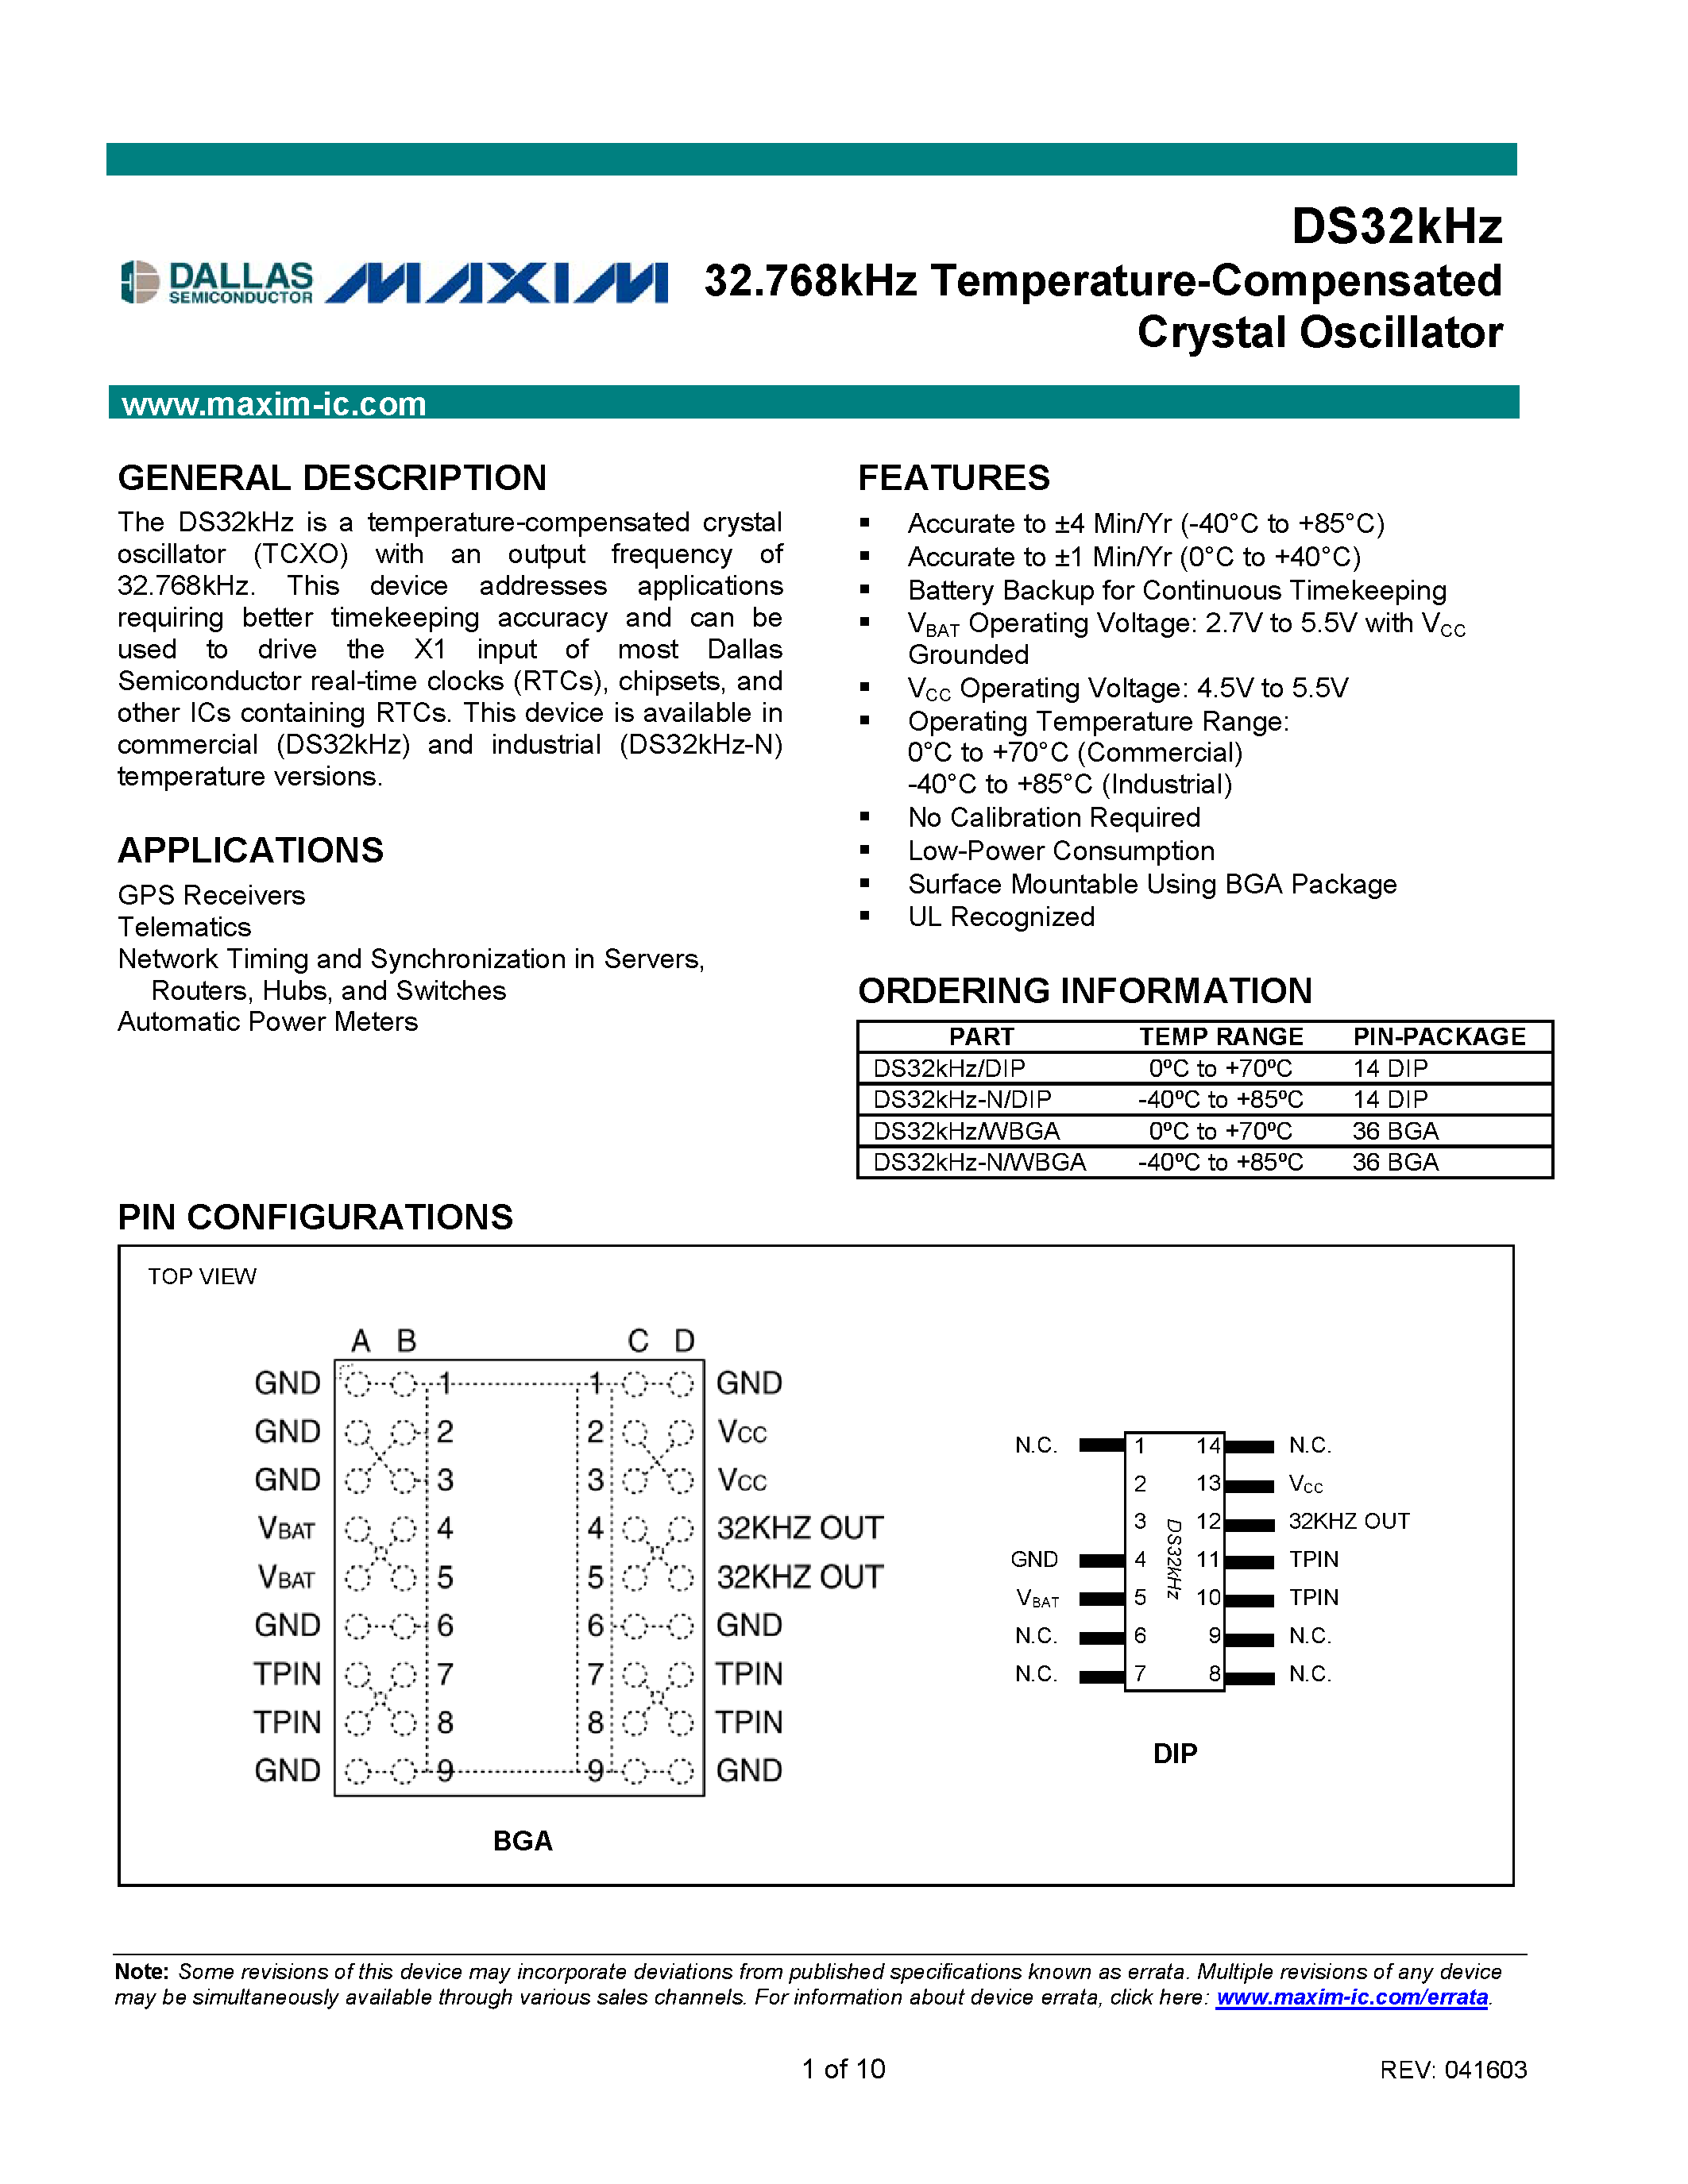 Datasheet DS32kHz-N - 32.768kHz Temperature-Compensated Crystal Oscillator page 1